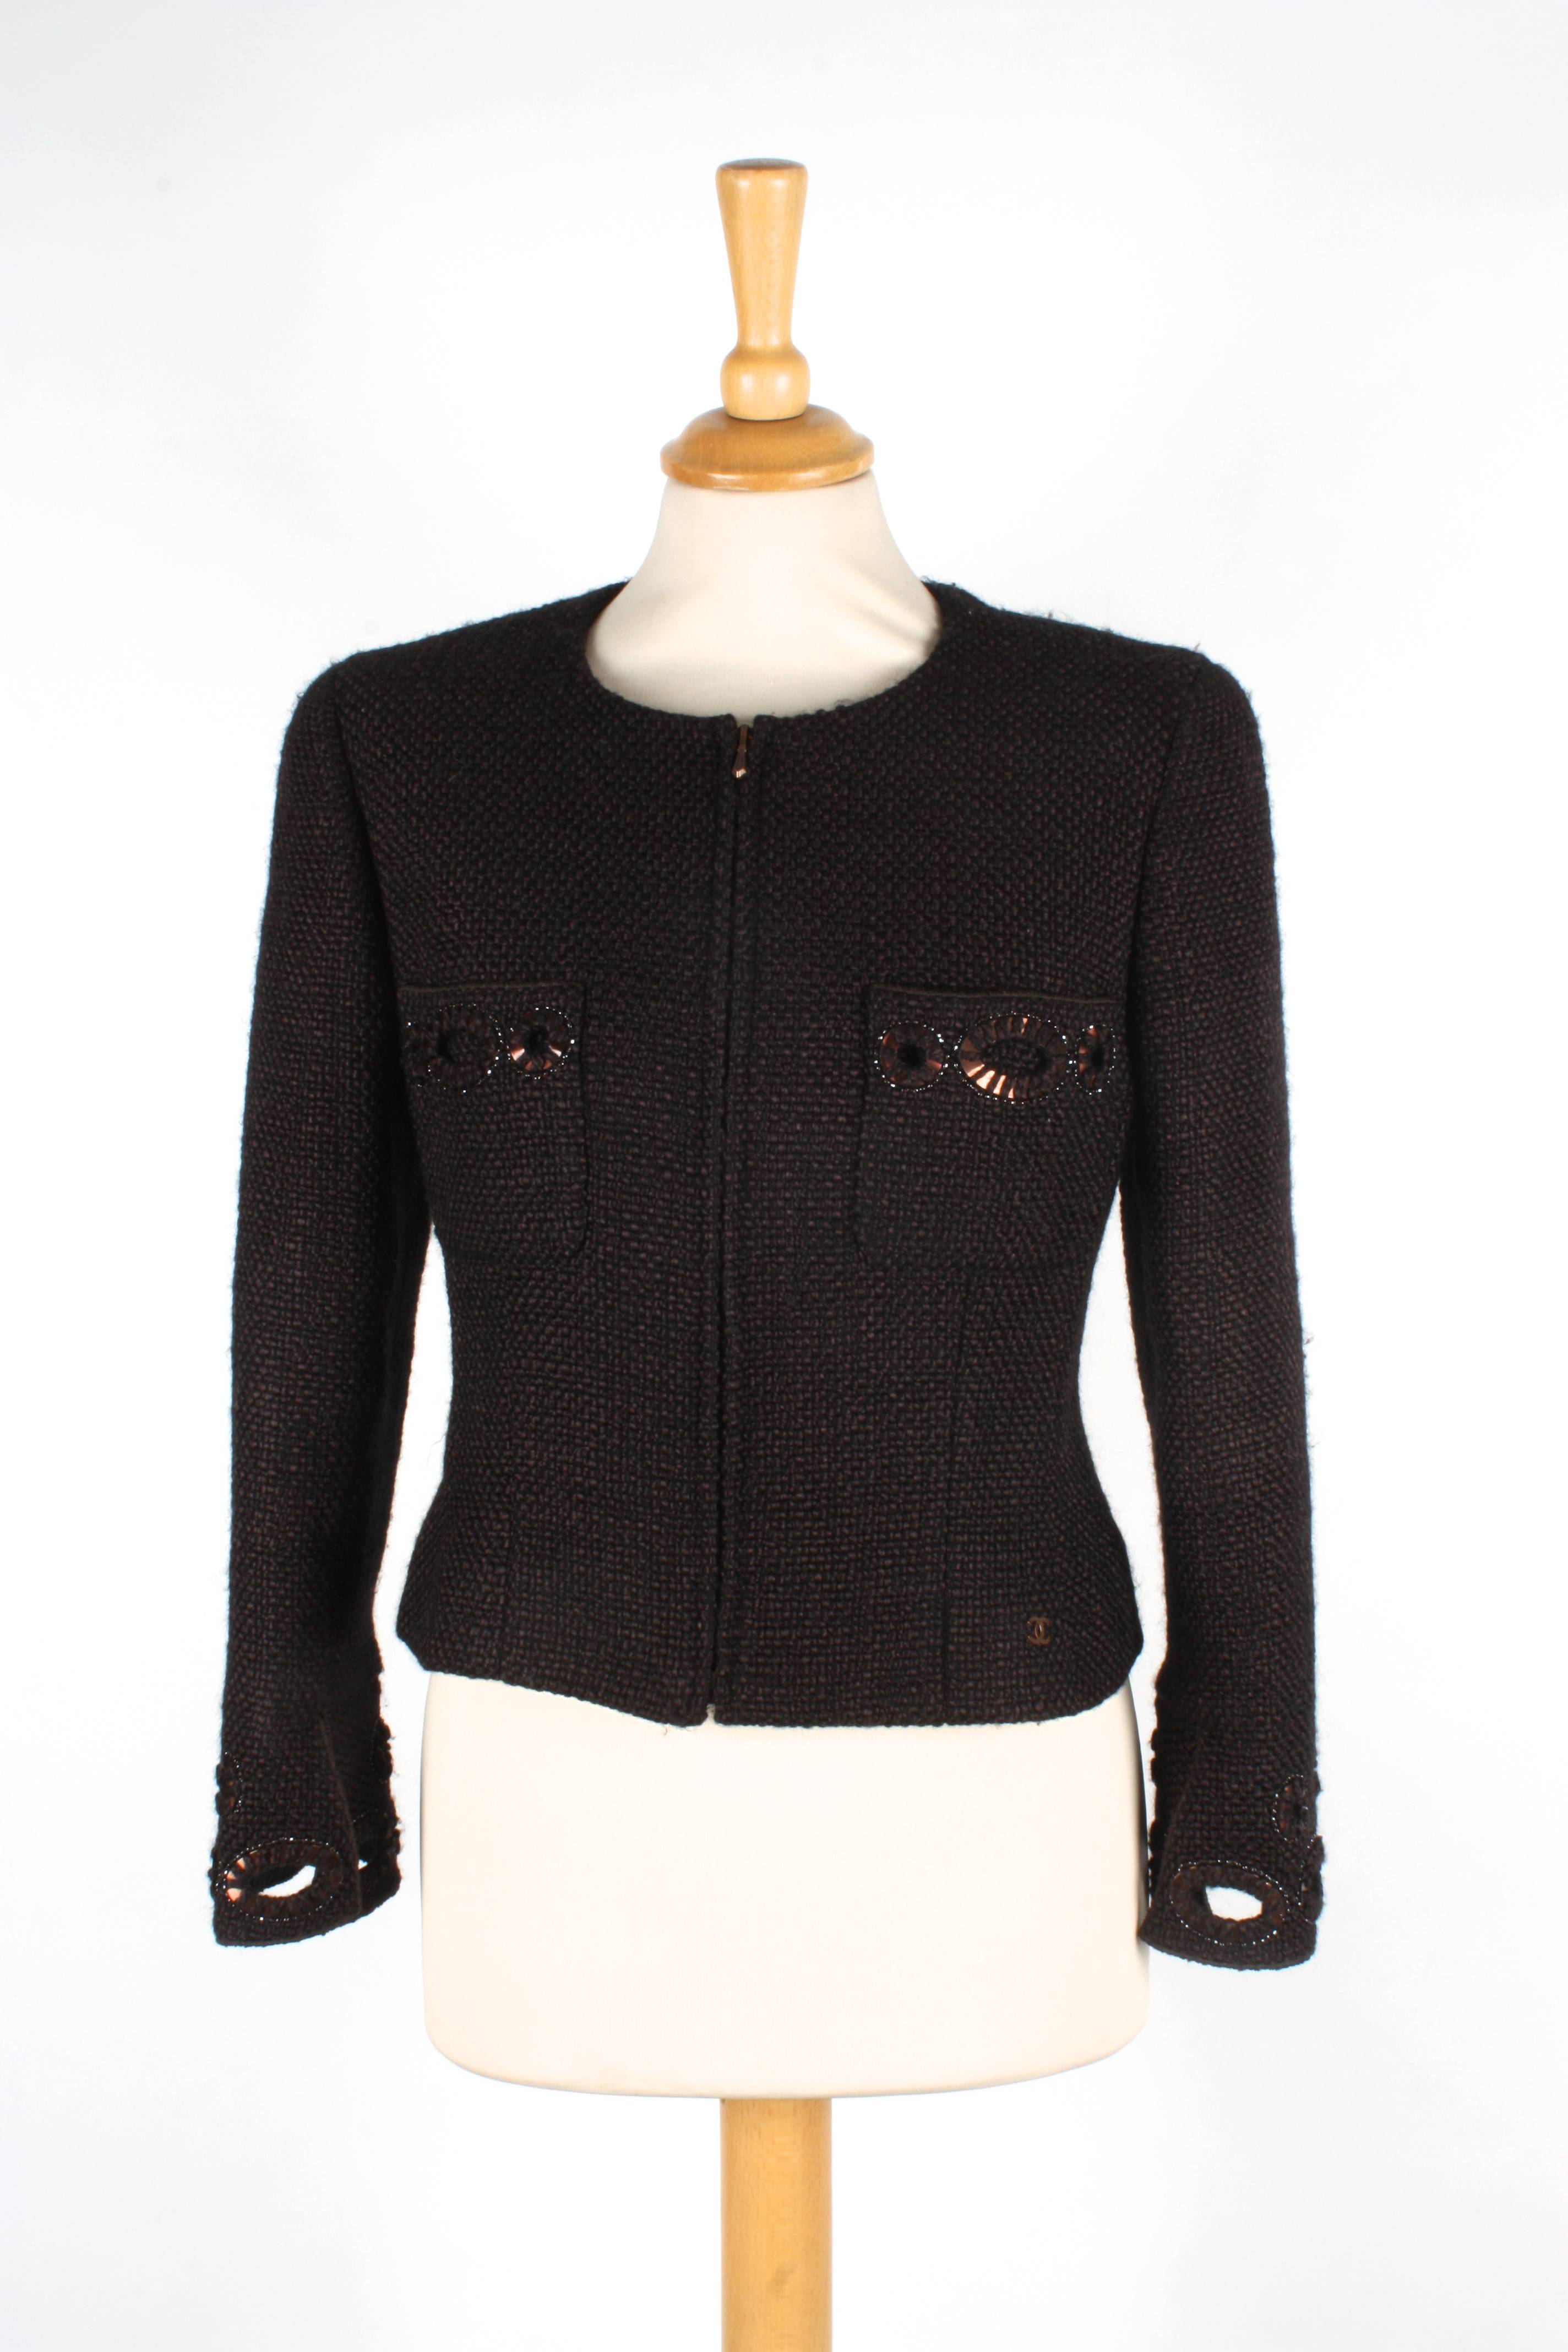 A brown Chanel wool jacket
with zip to front and two pockets to breast, with cut out patterns with